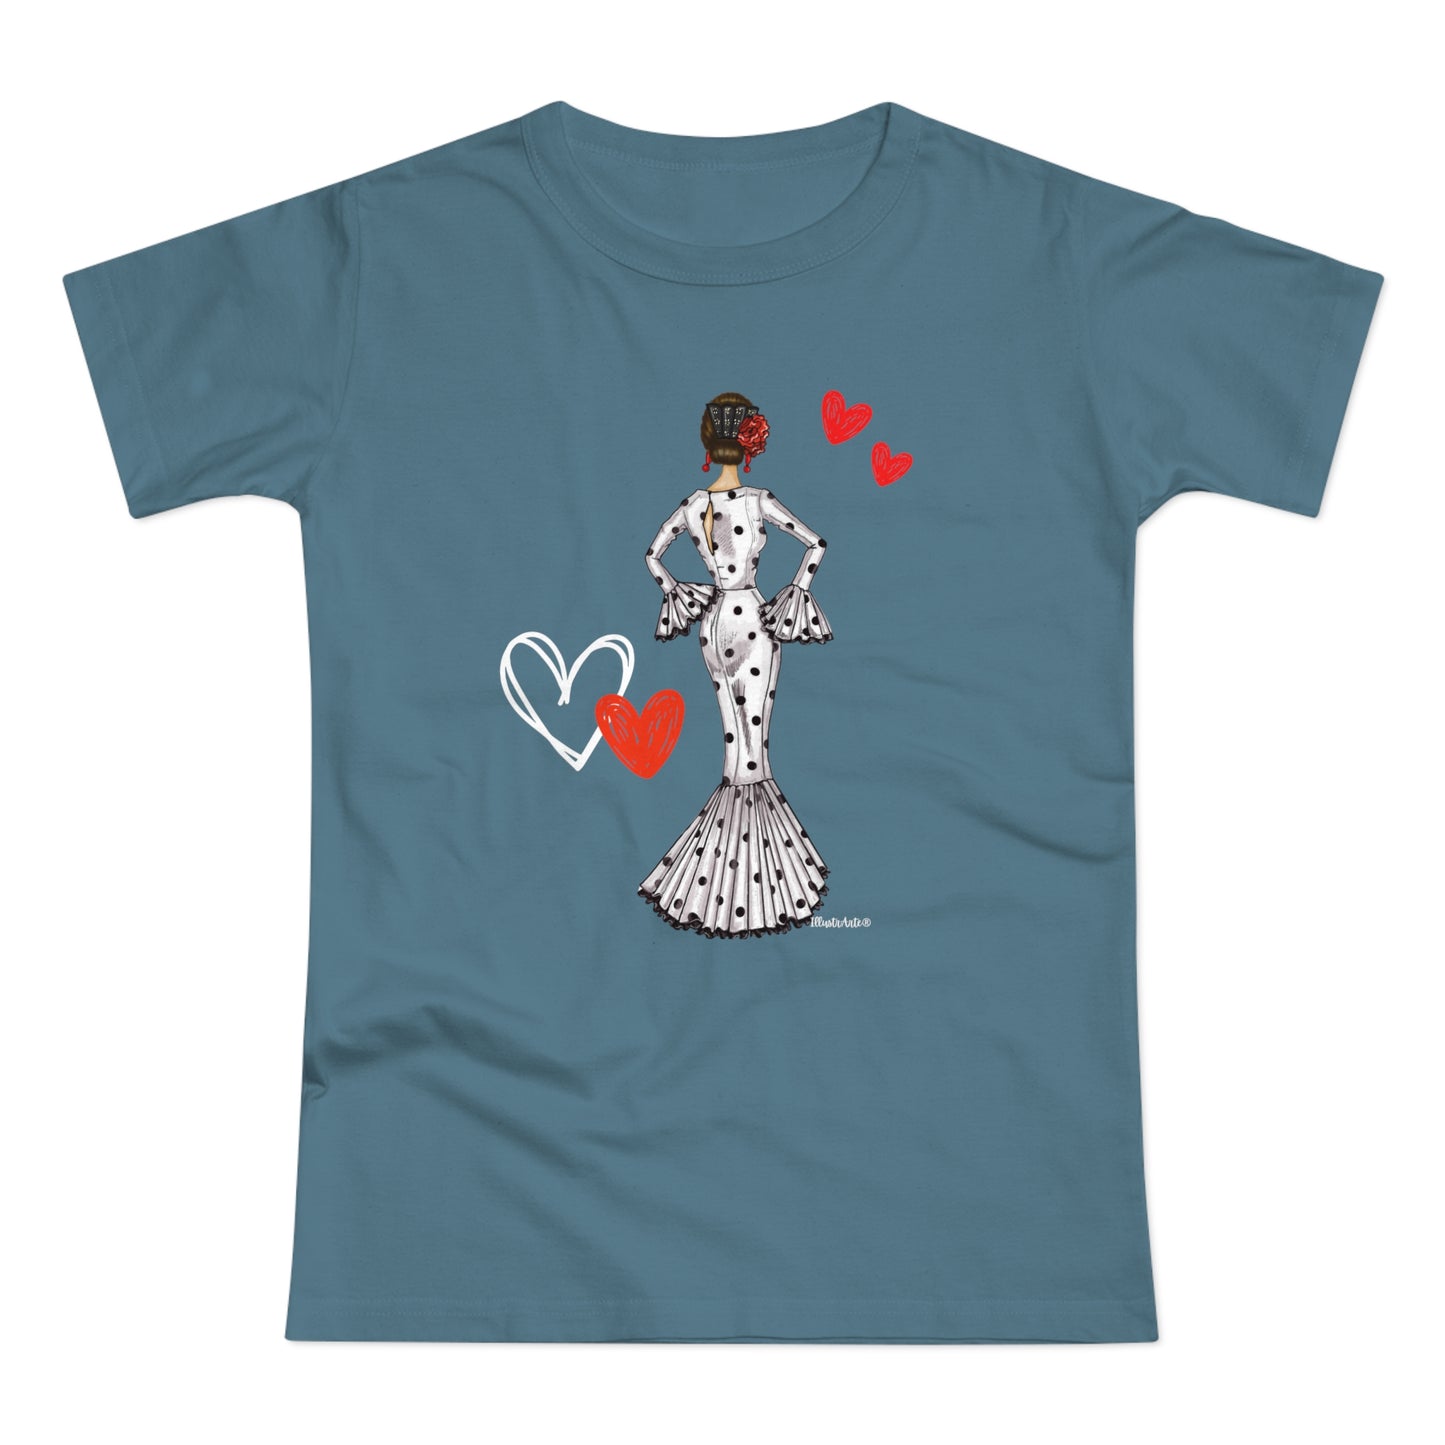 a women's t - shirt with a woman in a dress holding a heart